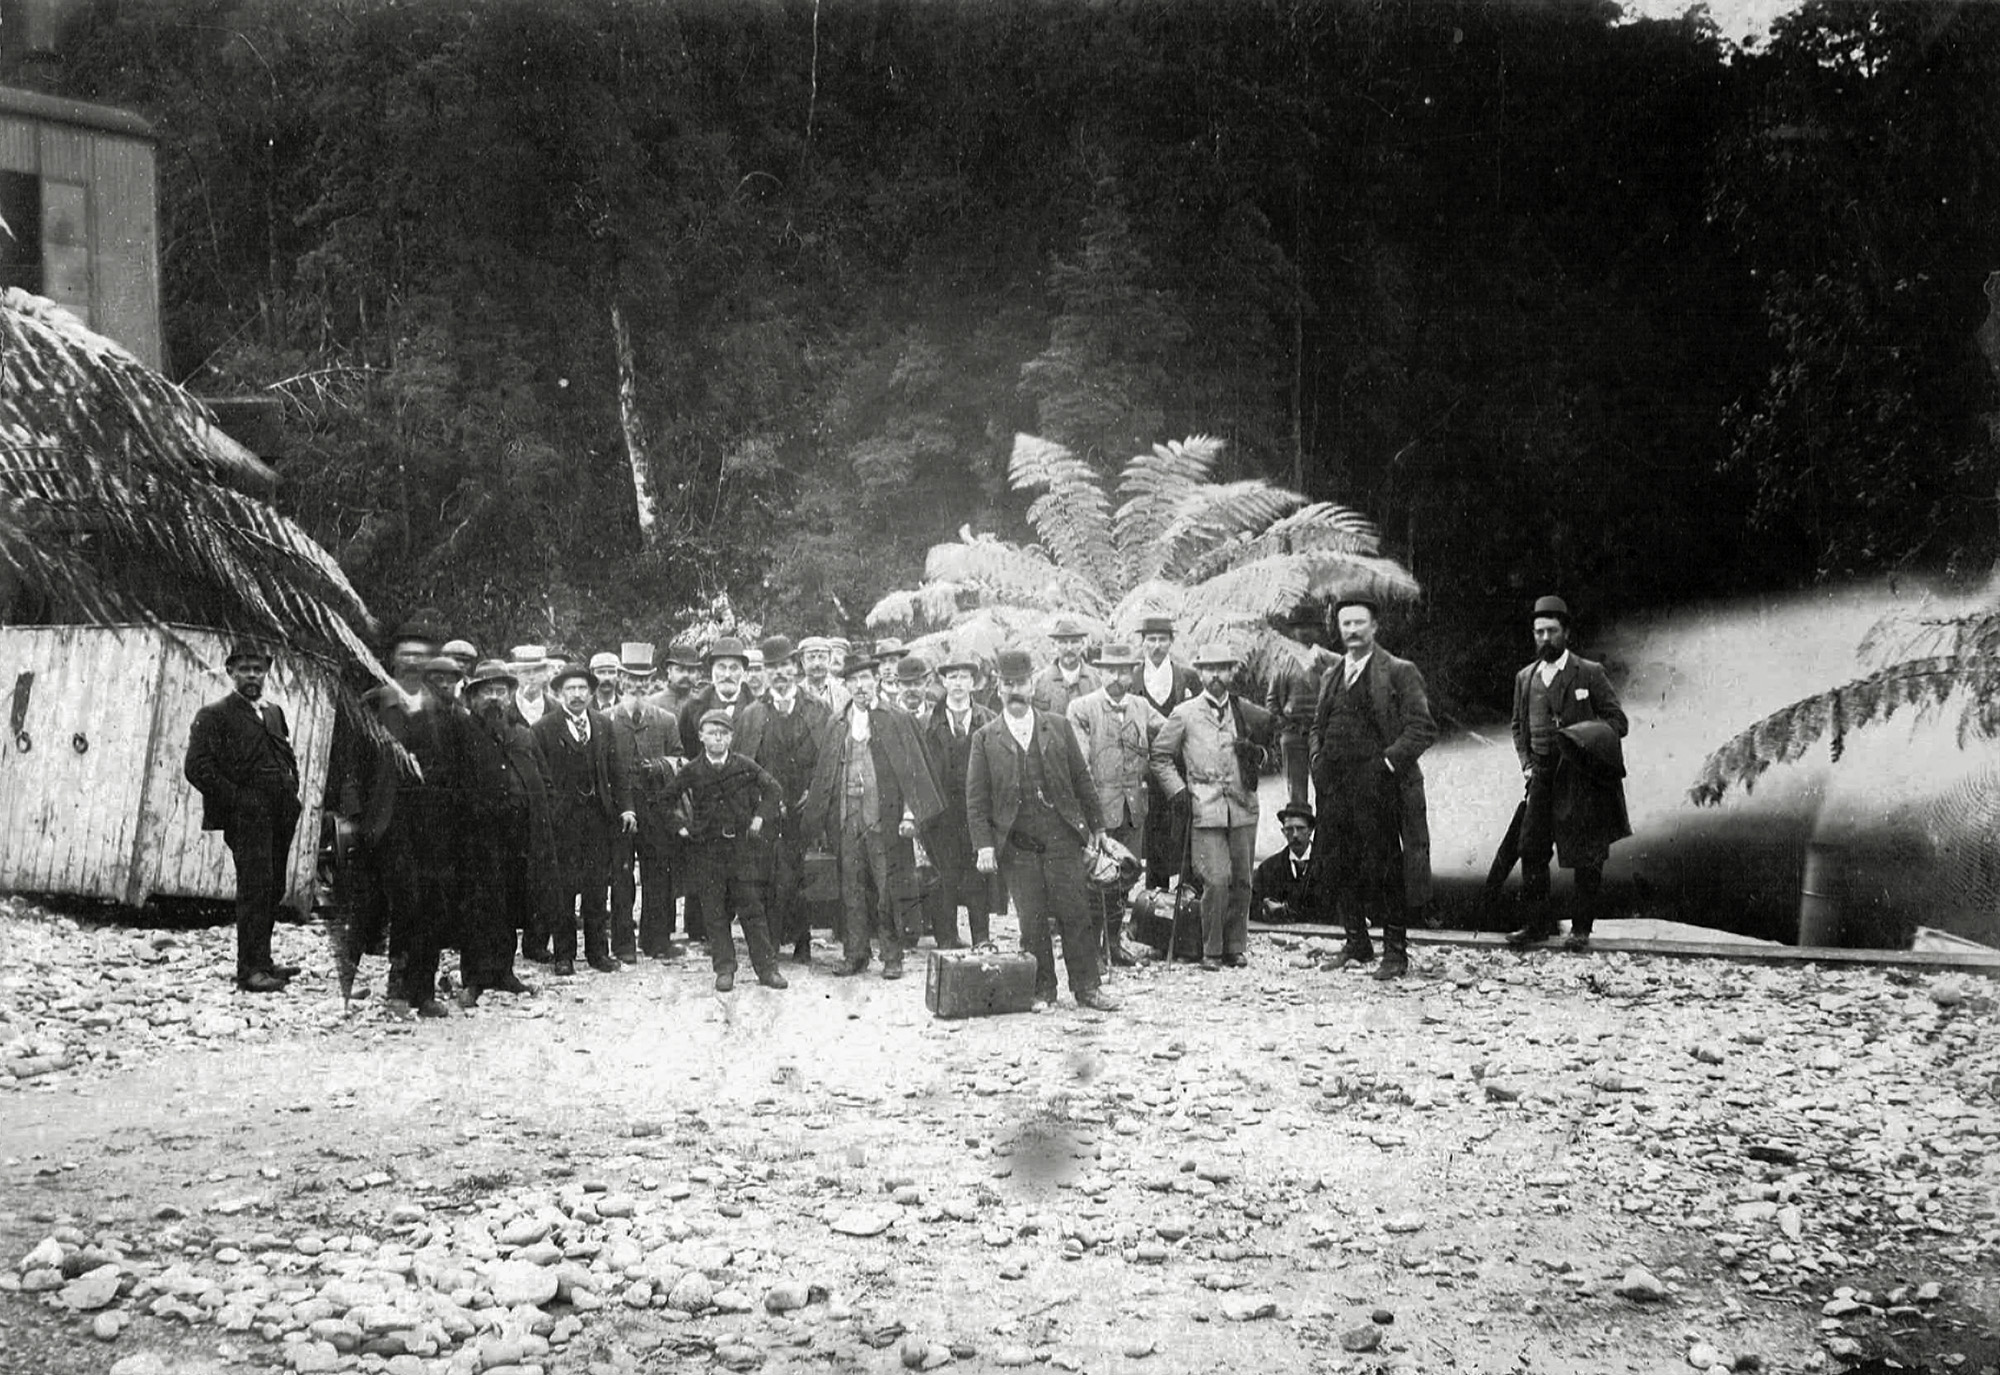 Frederick O. Henry, the short and bearded Scotsman standing fourth from left, made a fortune in the early mining days of the Tasmanian West Coast. My children are his great-great-grandchildren. Behind is the steam from a boat that linked the river port of Teepookana to the sea port of Strahan. Strahan flourishes today as a tourist destination. Teepookana is overgrown by the forest. This professional photograph by J. Mills of Zeehan comes from the F. O. Henry family archive. View full size.